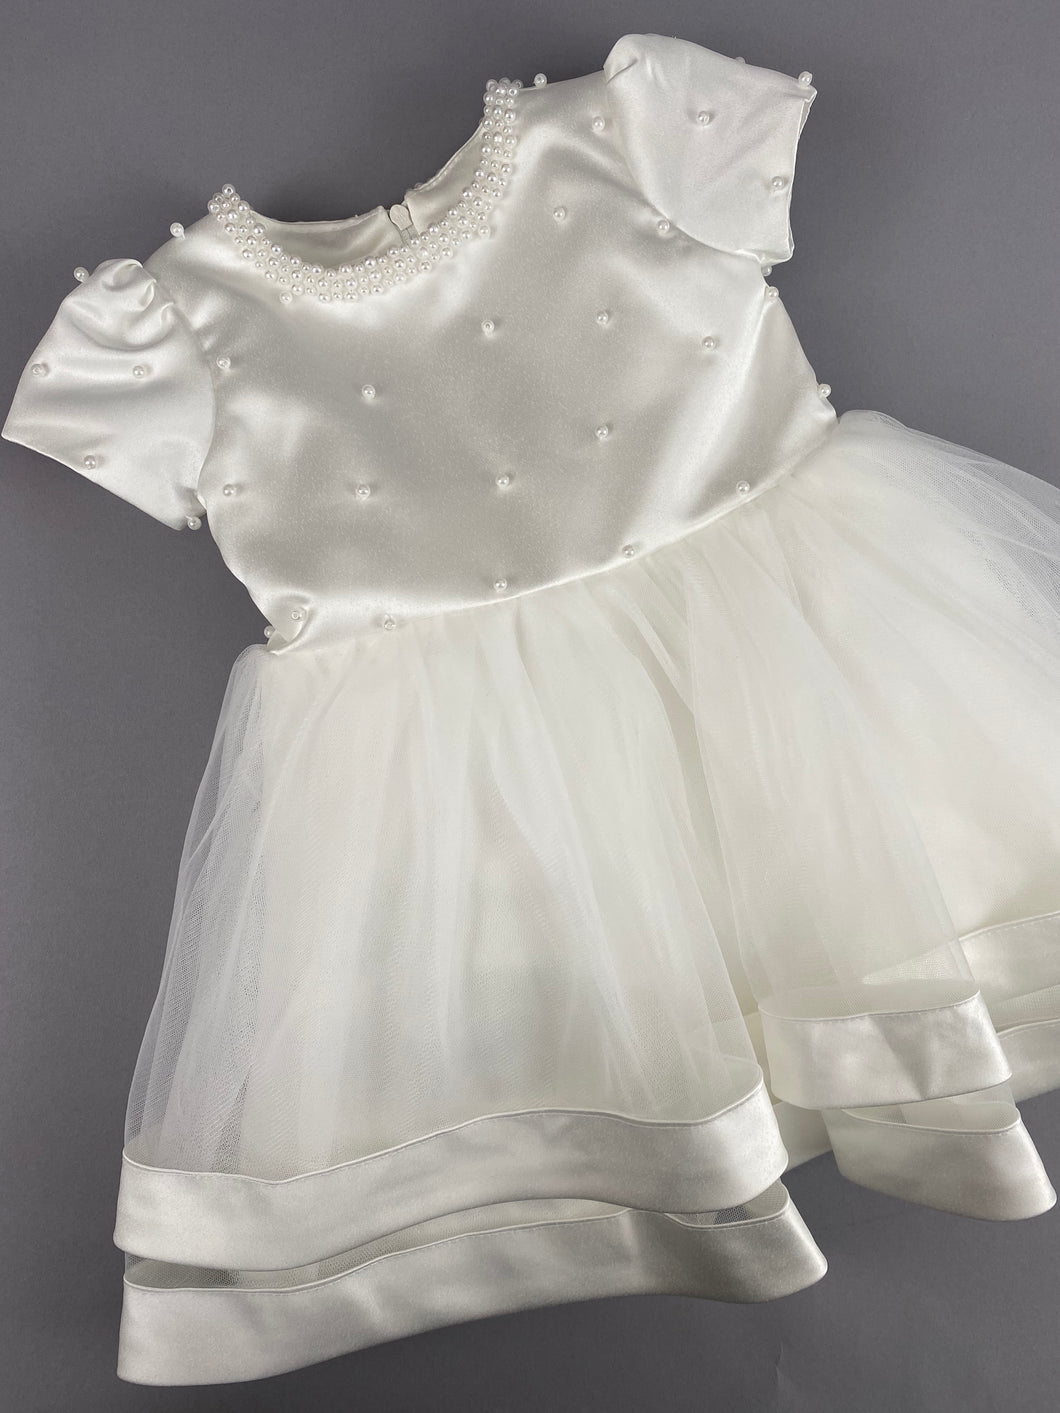 Dress 108 Girls Baptismal Christening Cap Sleeve Satin Top with Pearls Dress. Made exclusively for Rosies Collections.